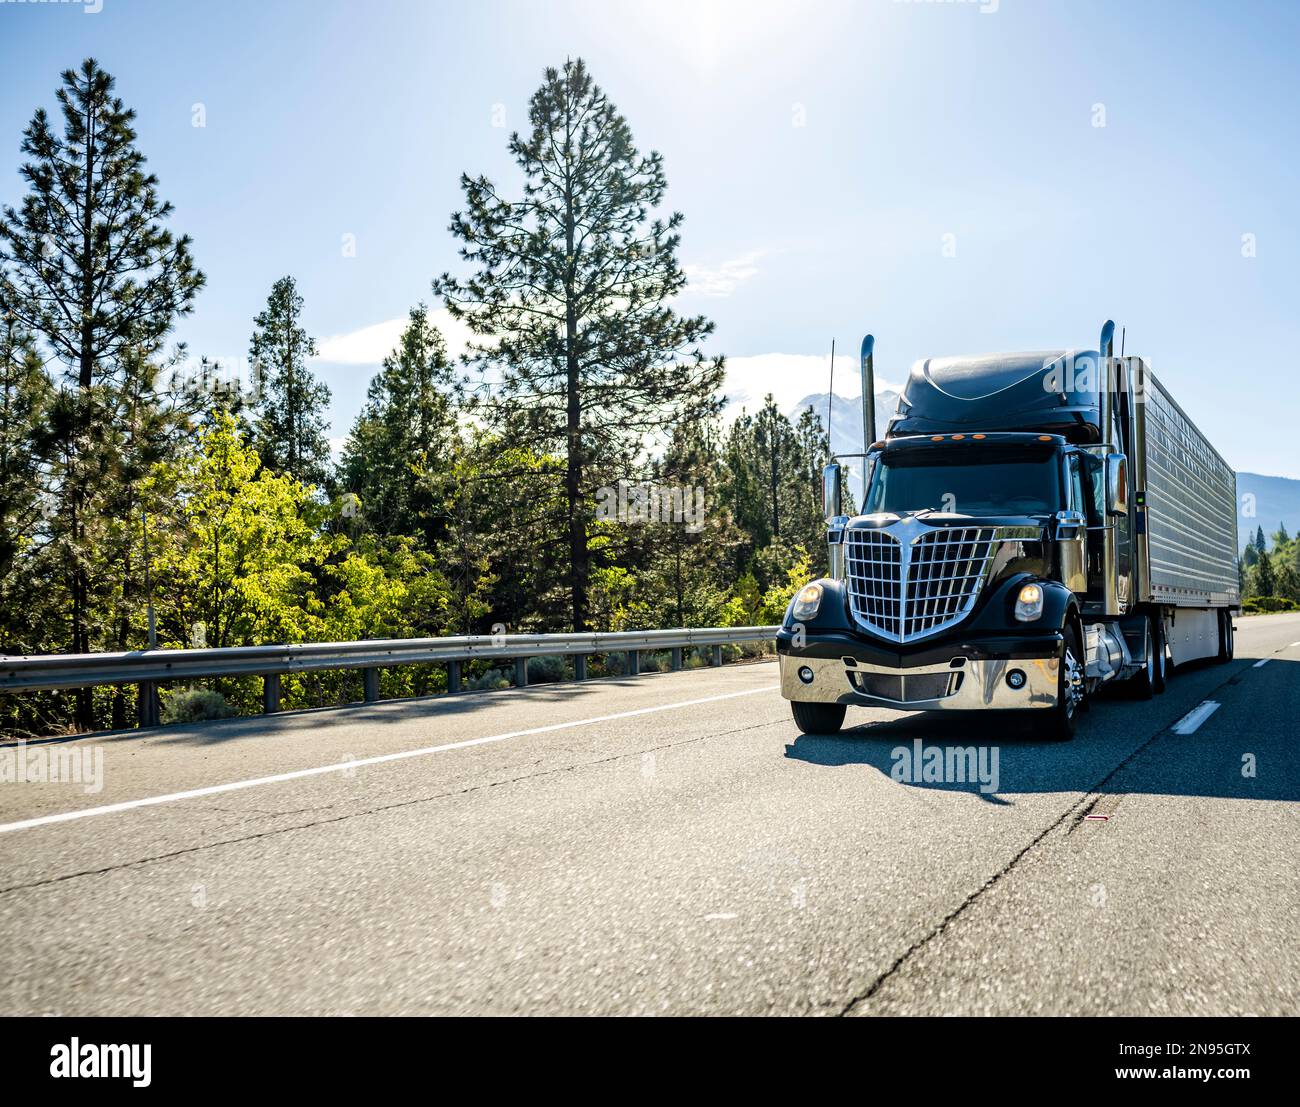 Industrial Long hauler big rig black semi truck tractor with extended cab for truck driver rest transporting frozen cargo in refrigerator semi trailer Stock Photo